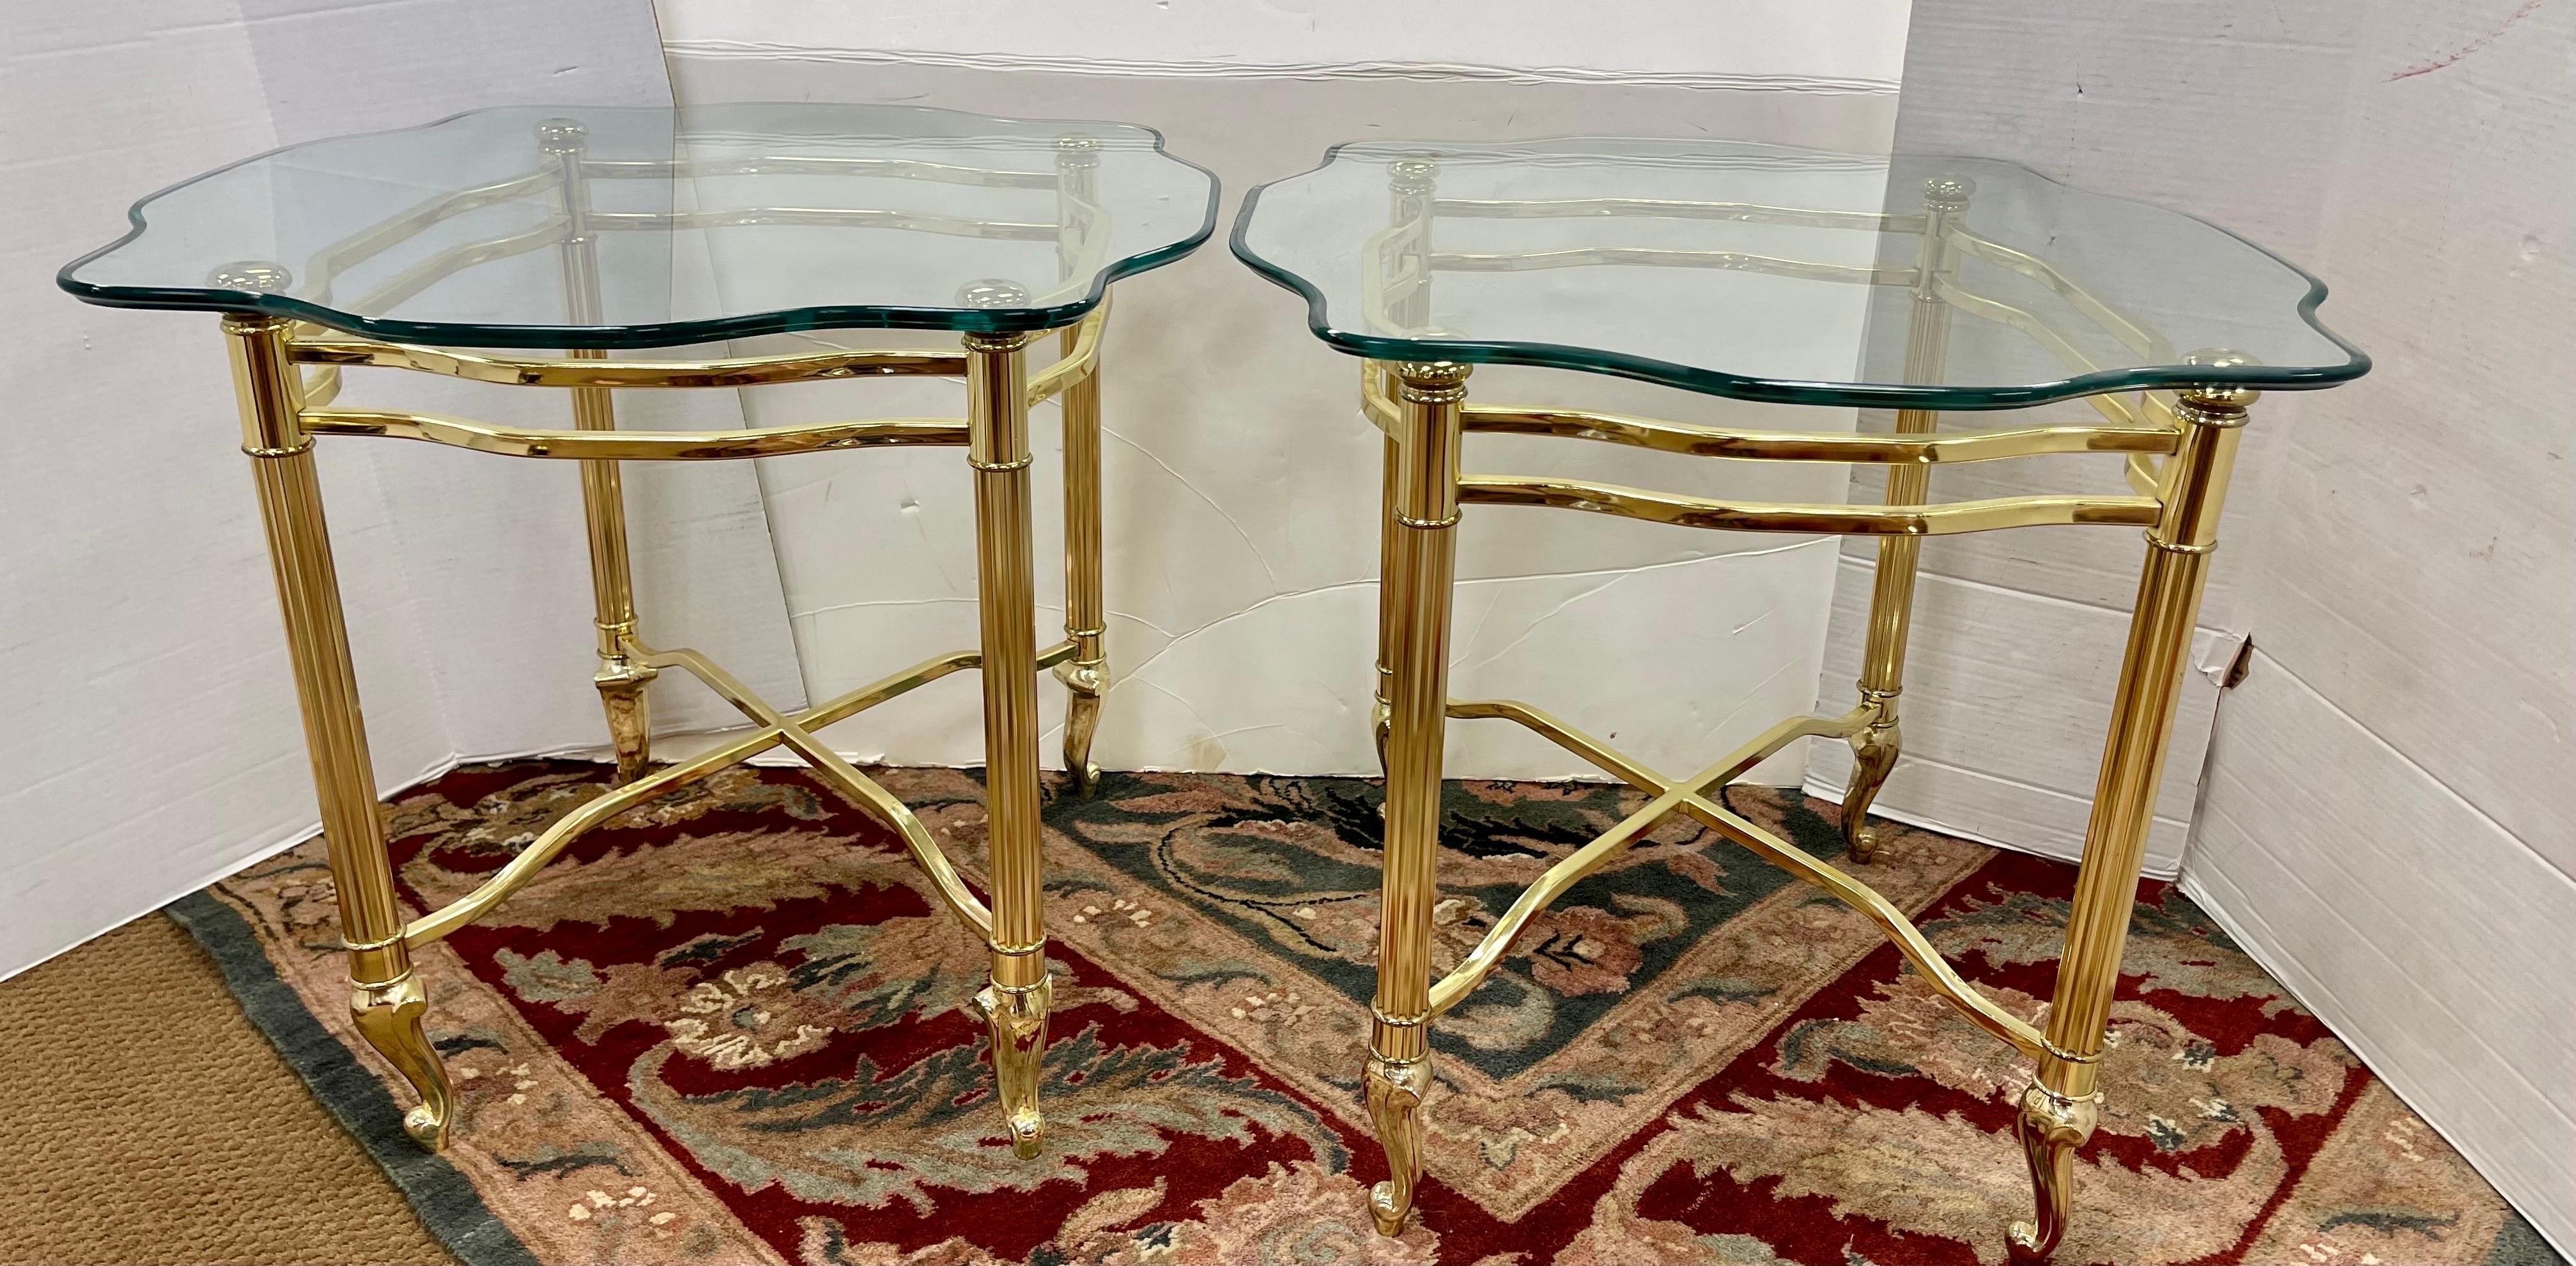 Elegant pair of matching Maison Jansen style brass and glass side table.
Glass features scalloped edges and bevel throughout. Brass is in great condition 
and these set has great scale and better lines.